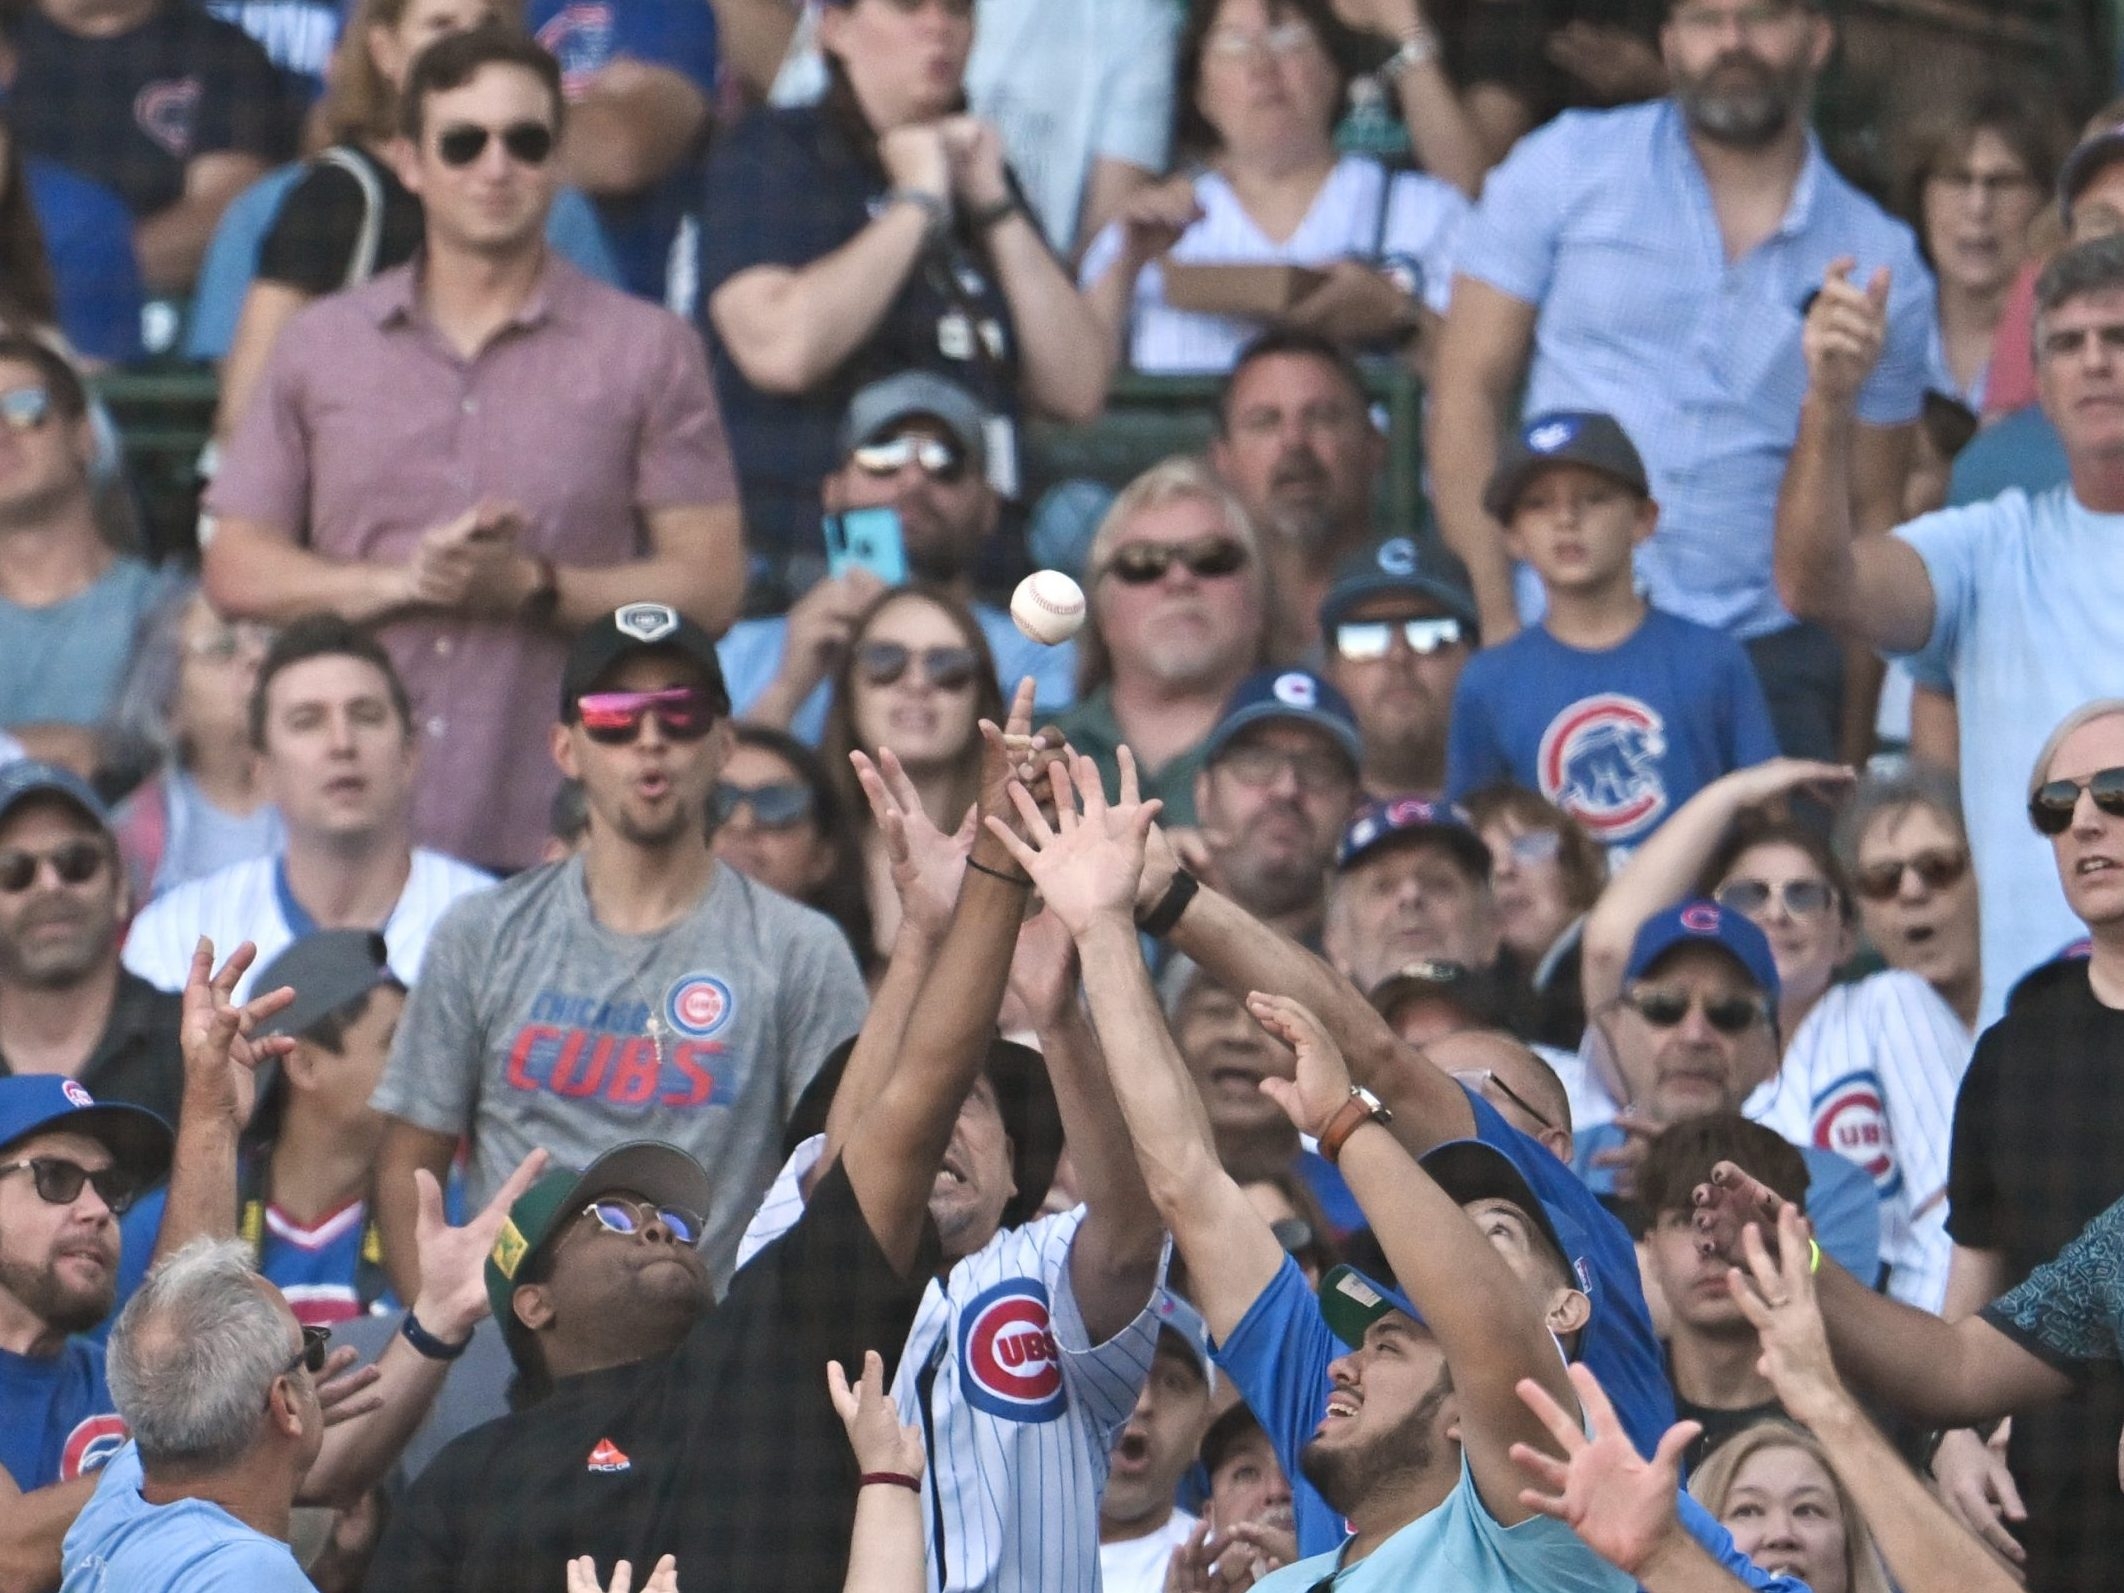 MLB draws 70.75 million fans, first time over 70 million since 2017